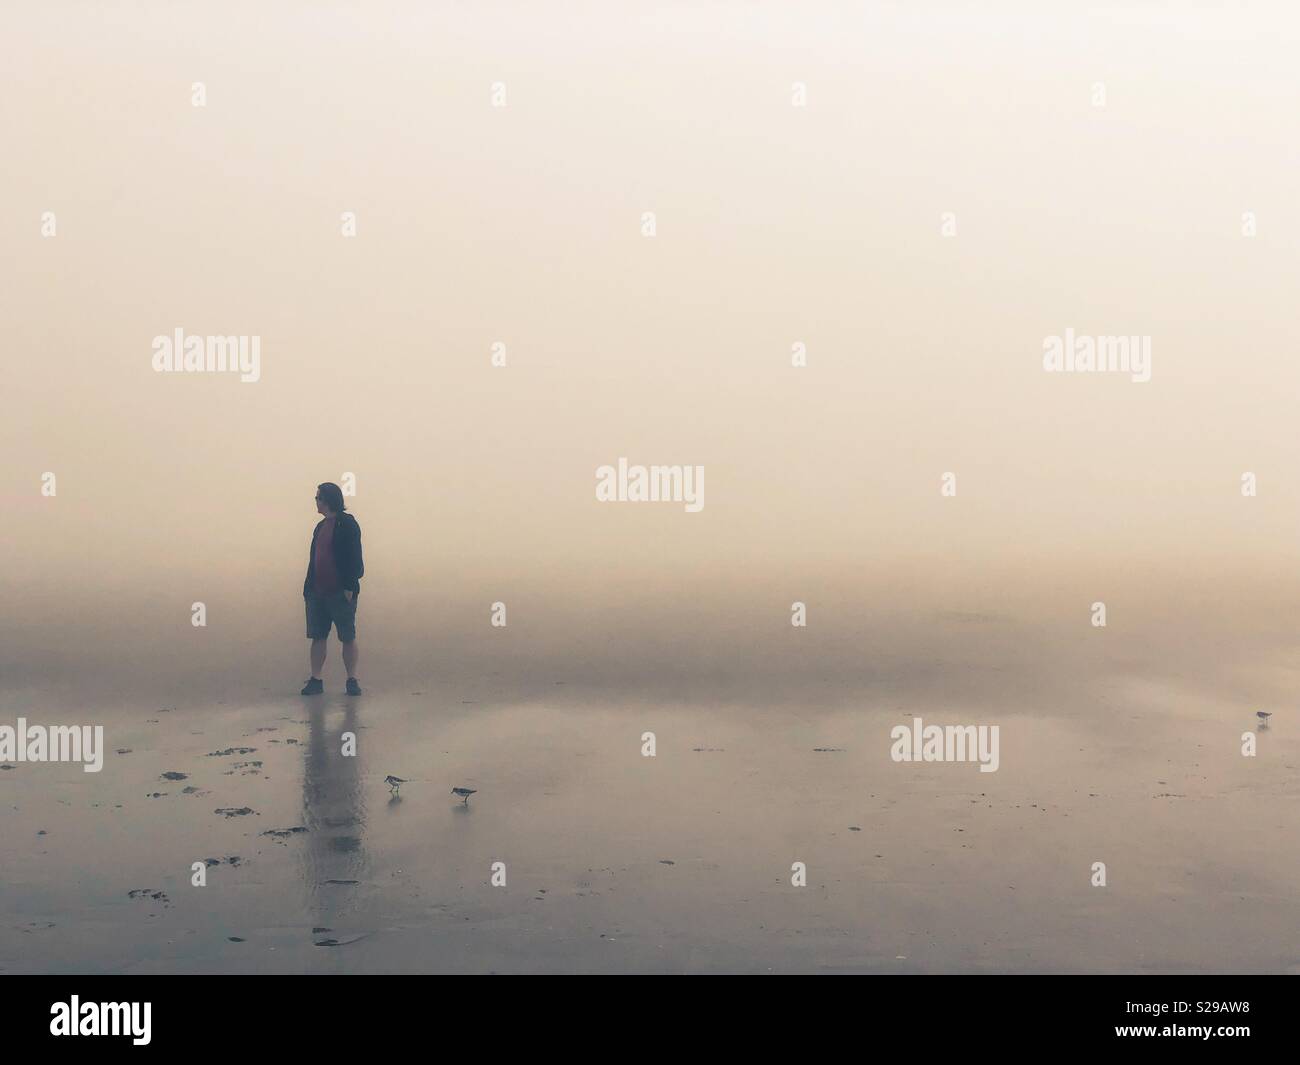 A man standing alone on a foggy beach. Stock Photo